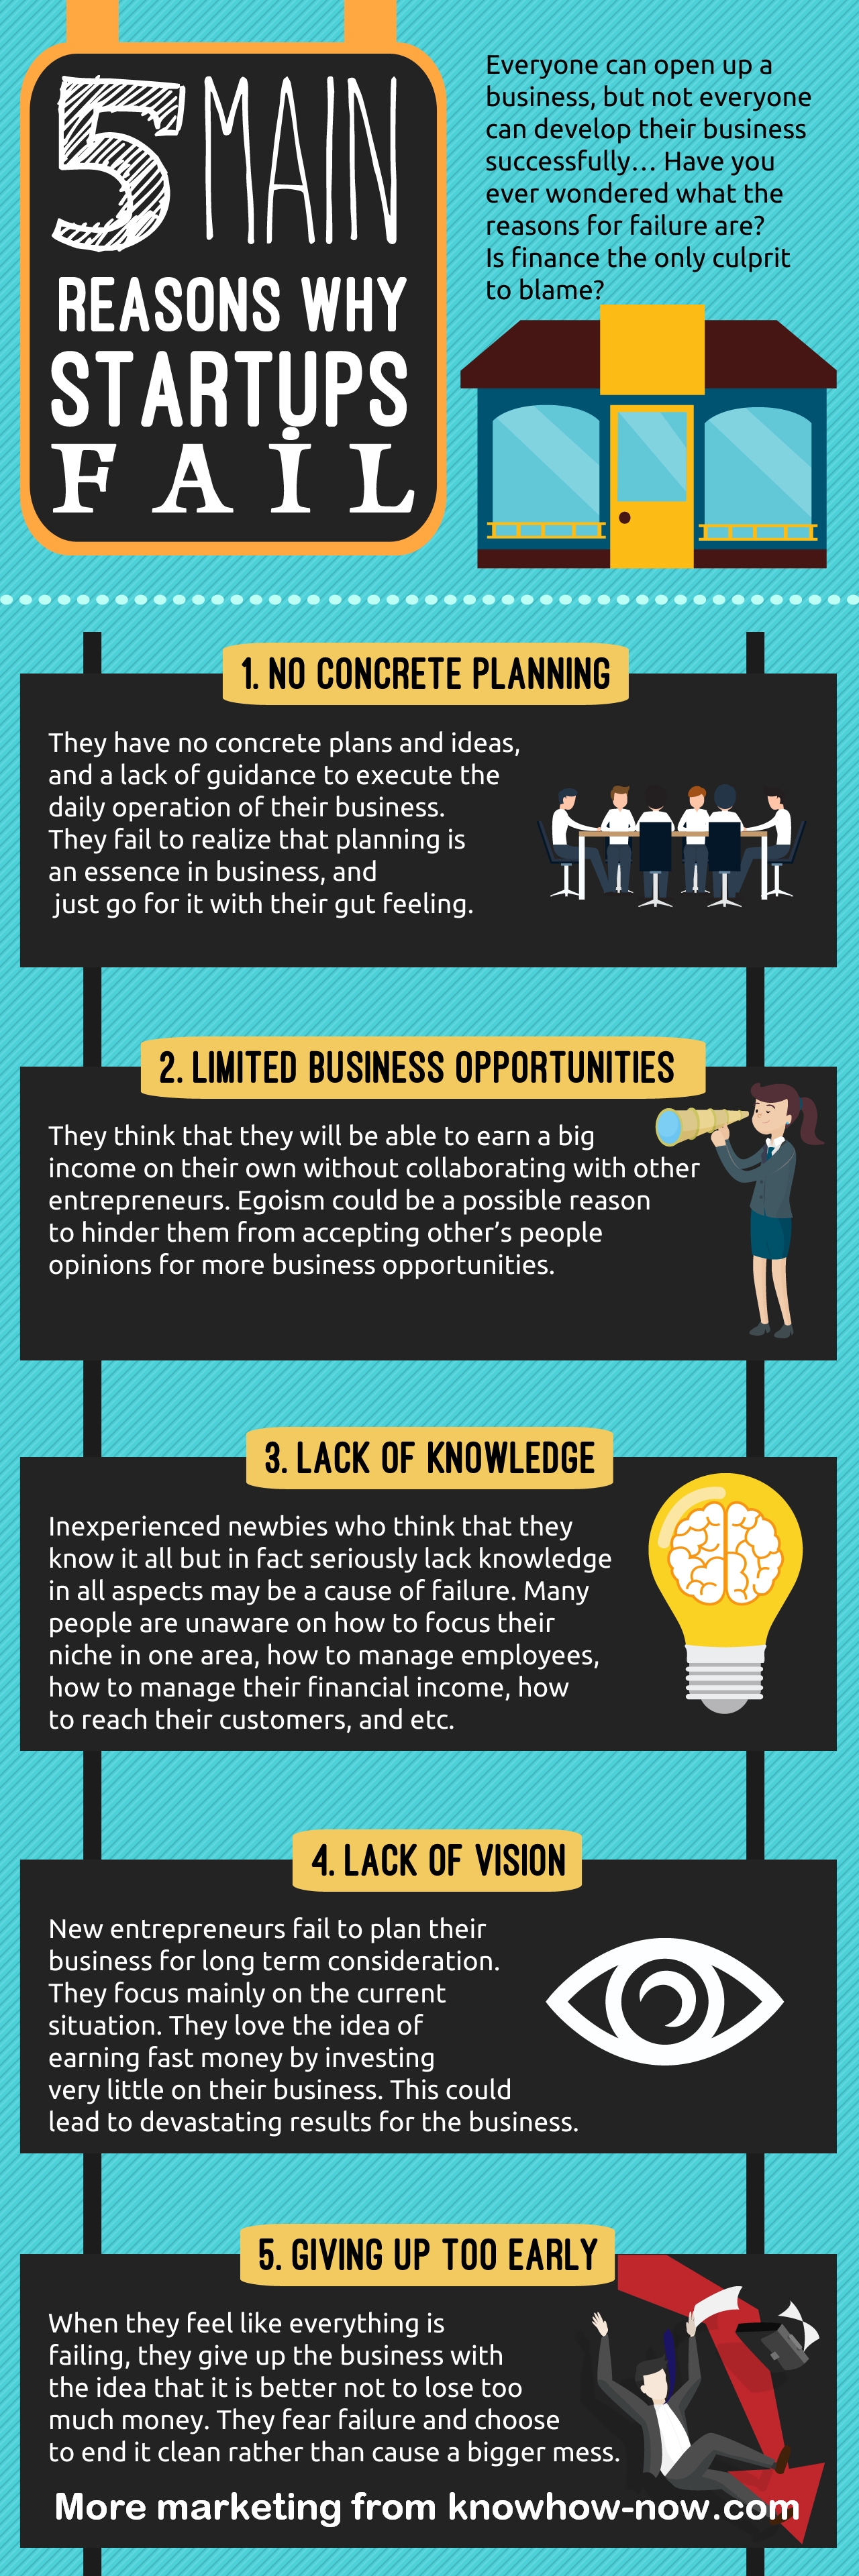 why do businesses fail - article and infographic